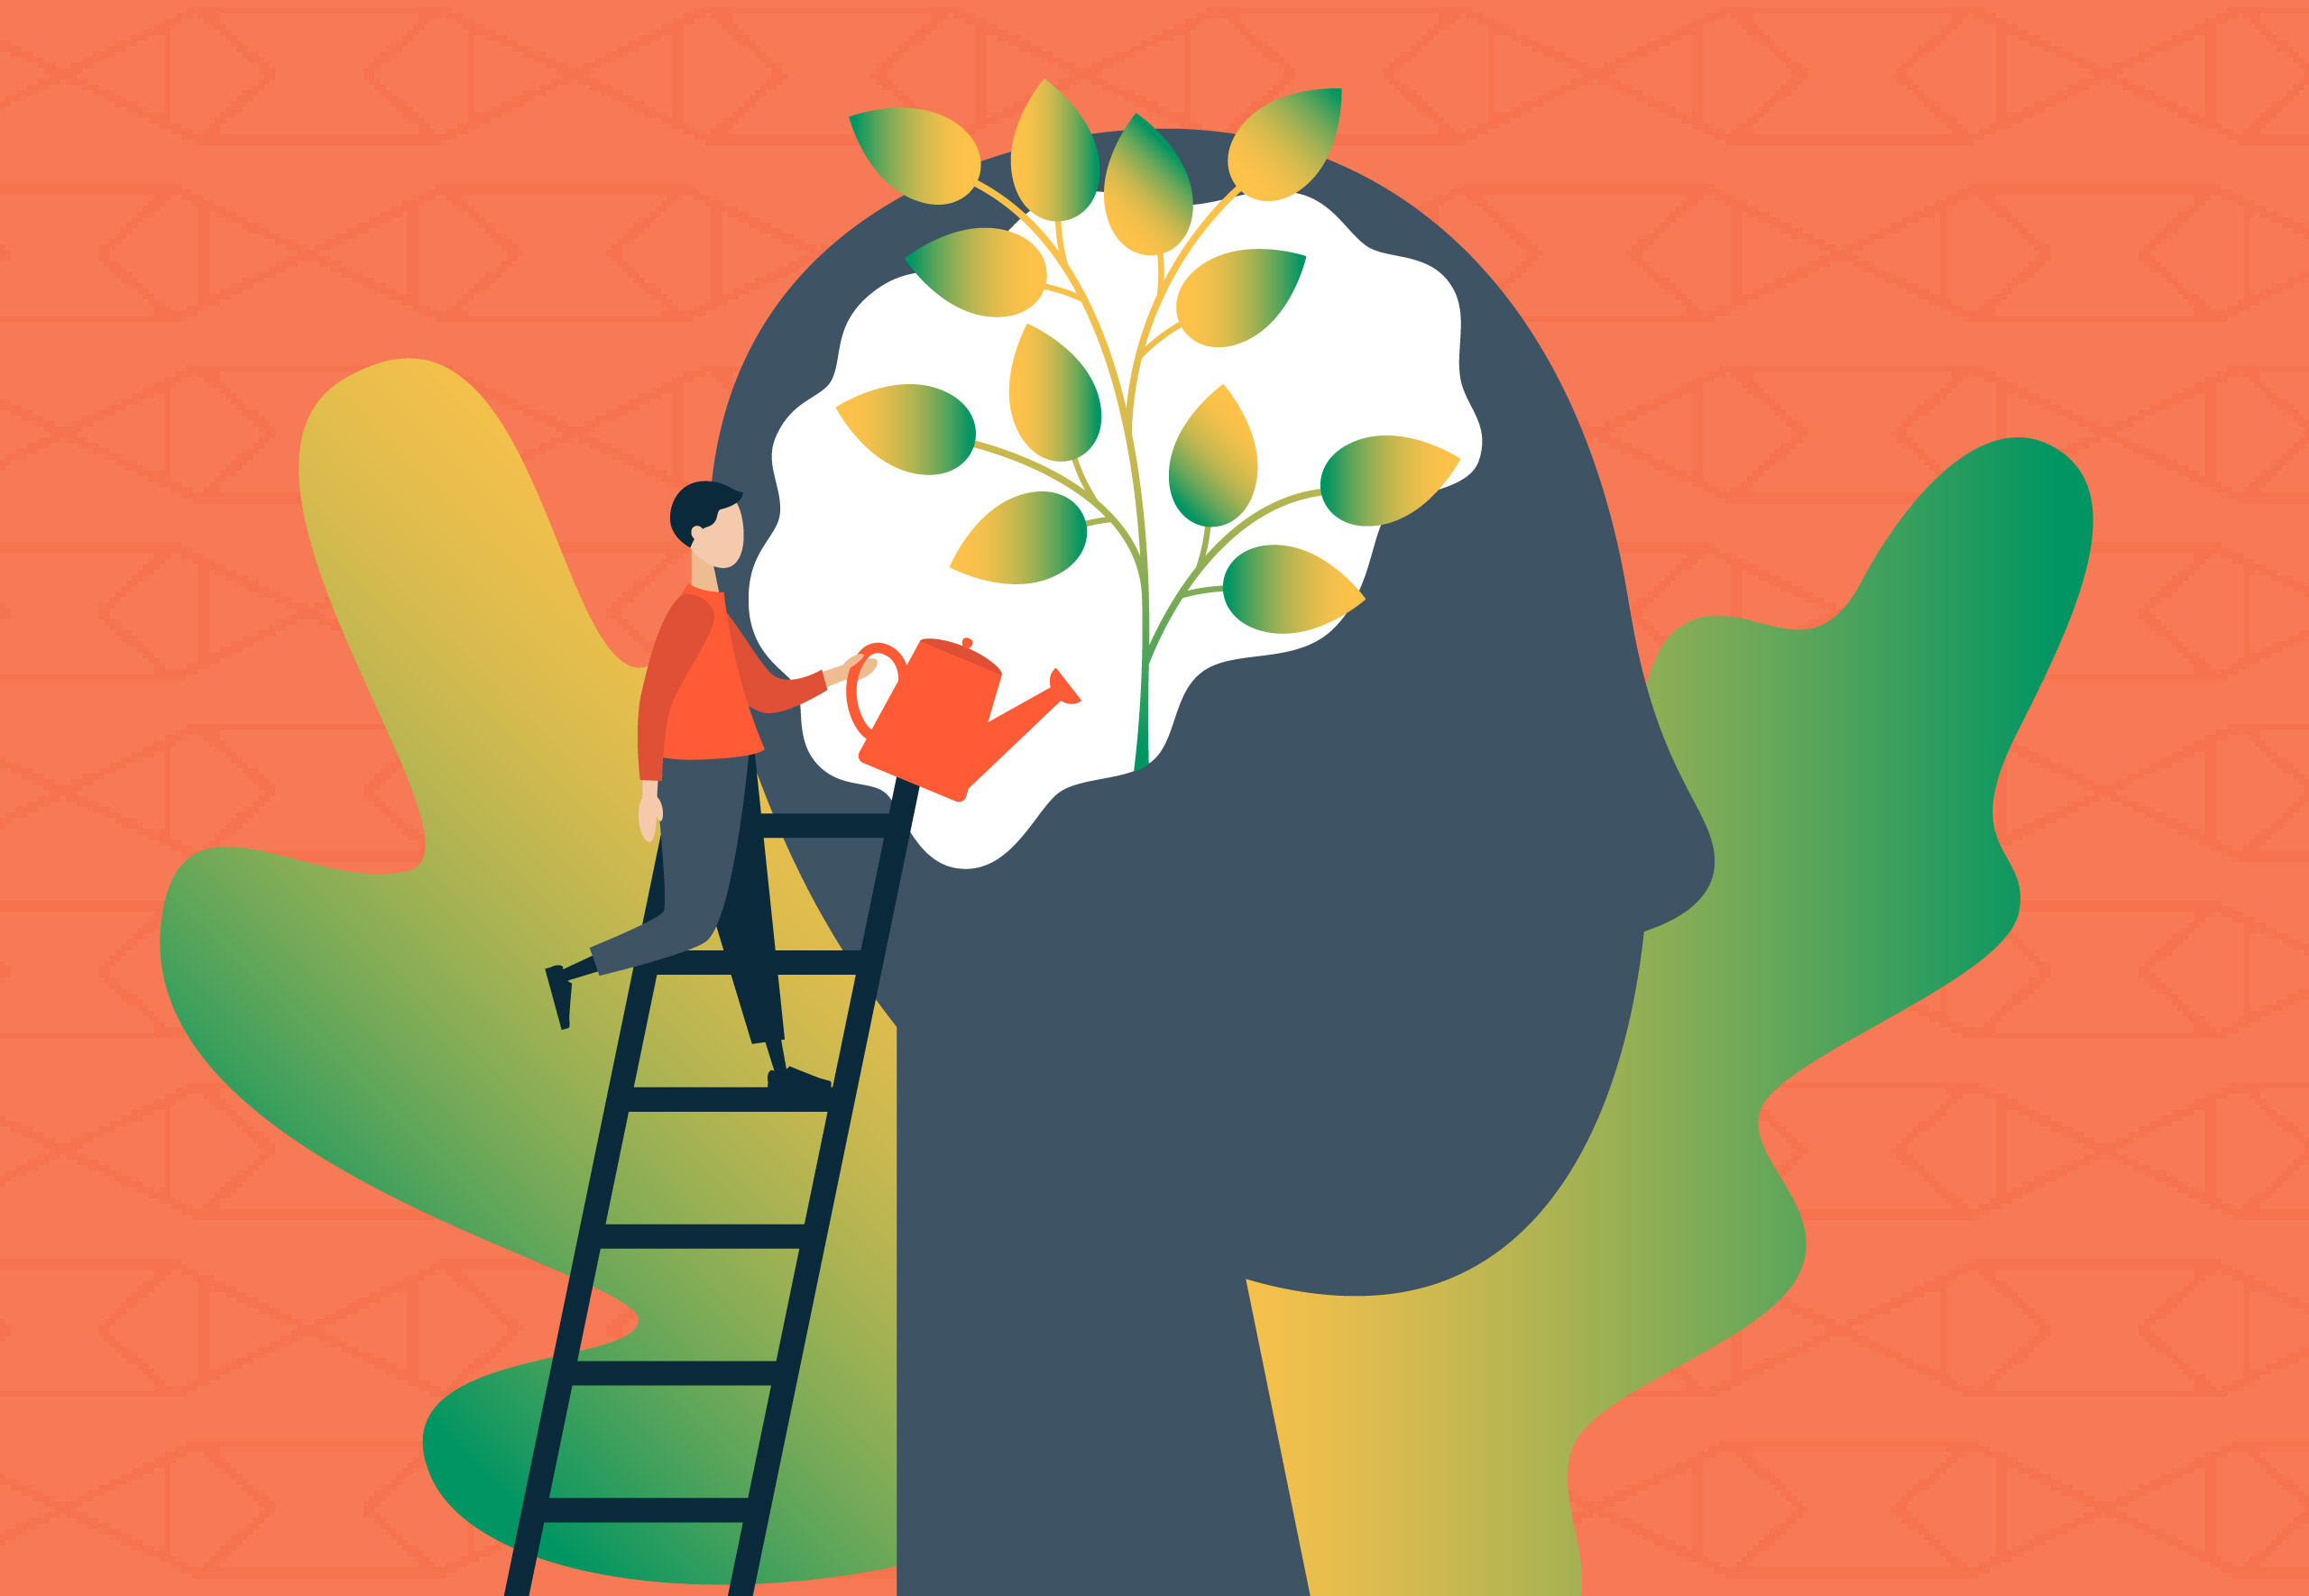 A person watering a brain with leaves growing out of it